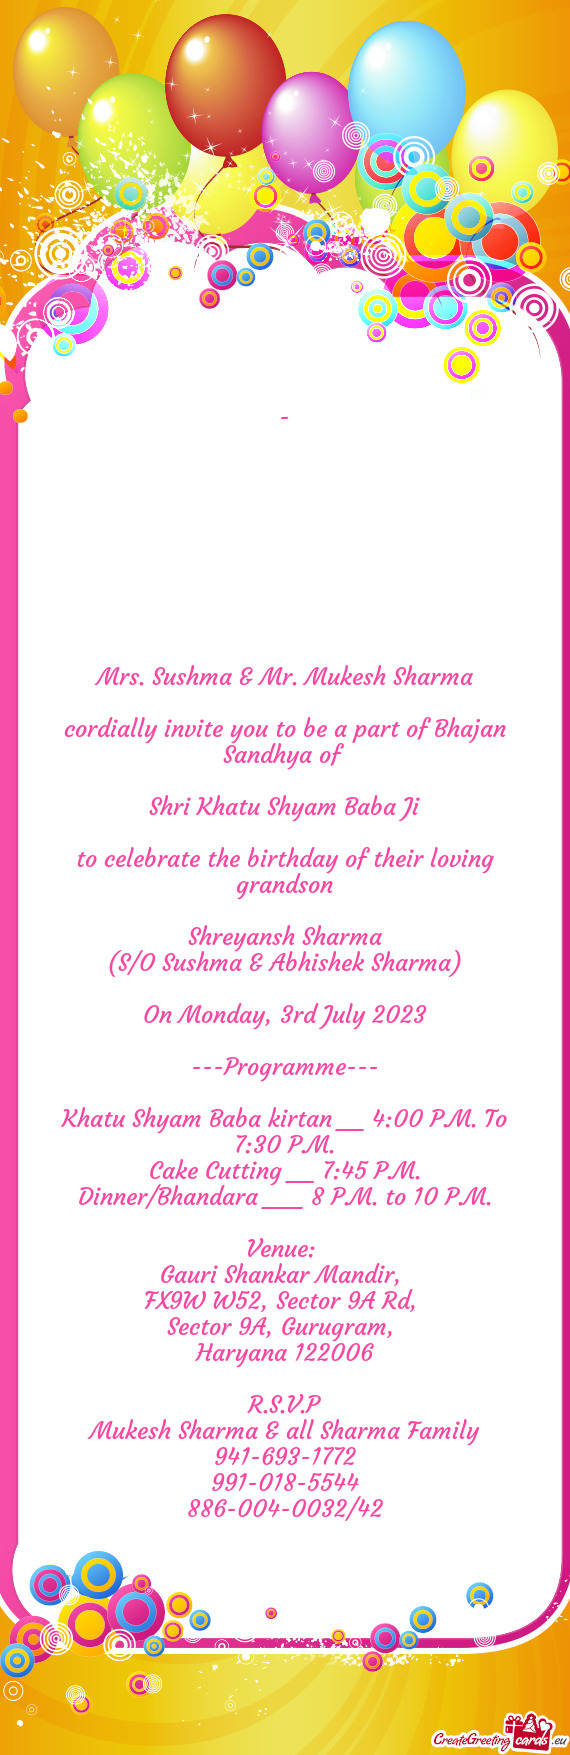 Cordially invite you to be a part of Bhajan Sandhya of